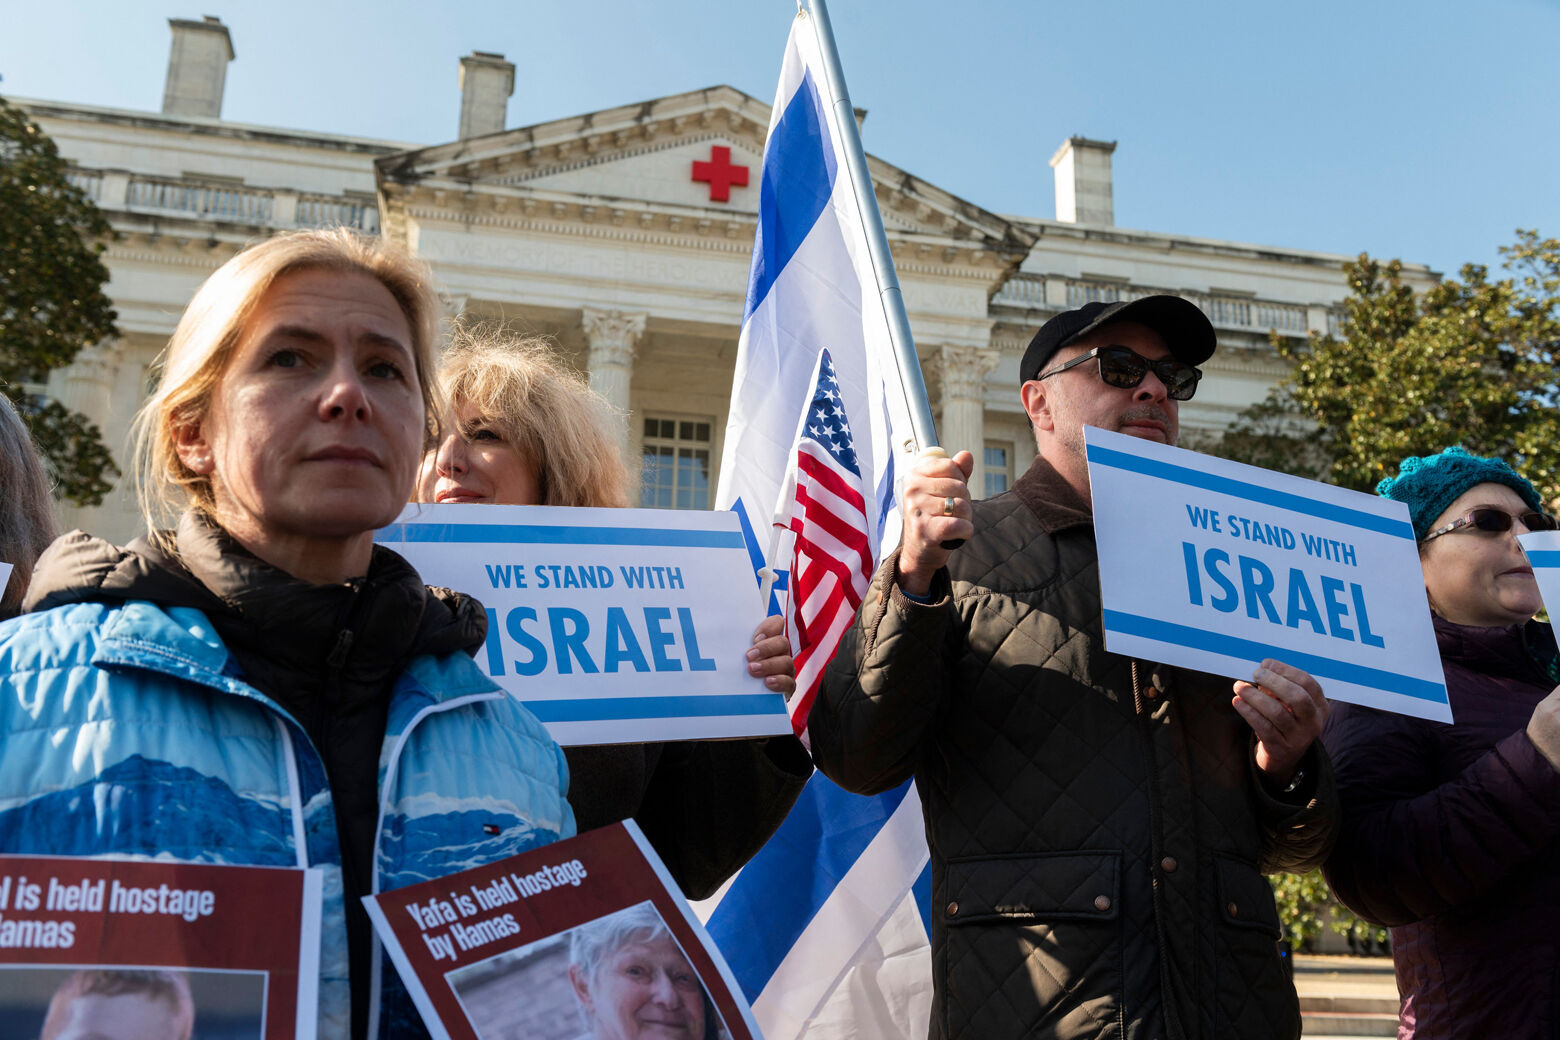 ‘March for Israel’ in DC expected to bring large crowds, parking and